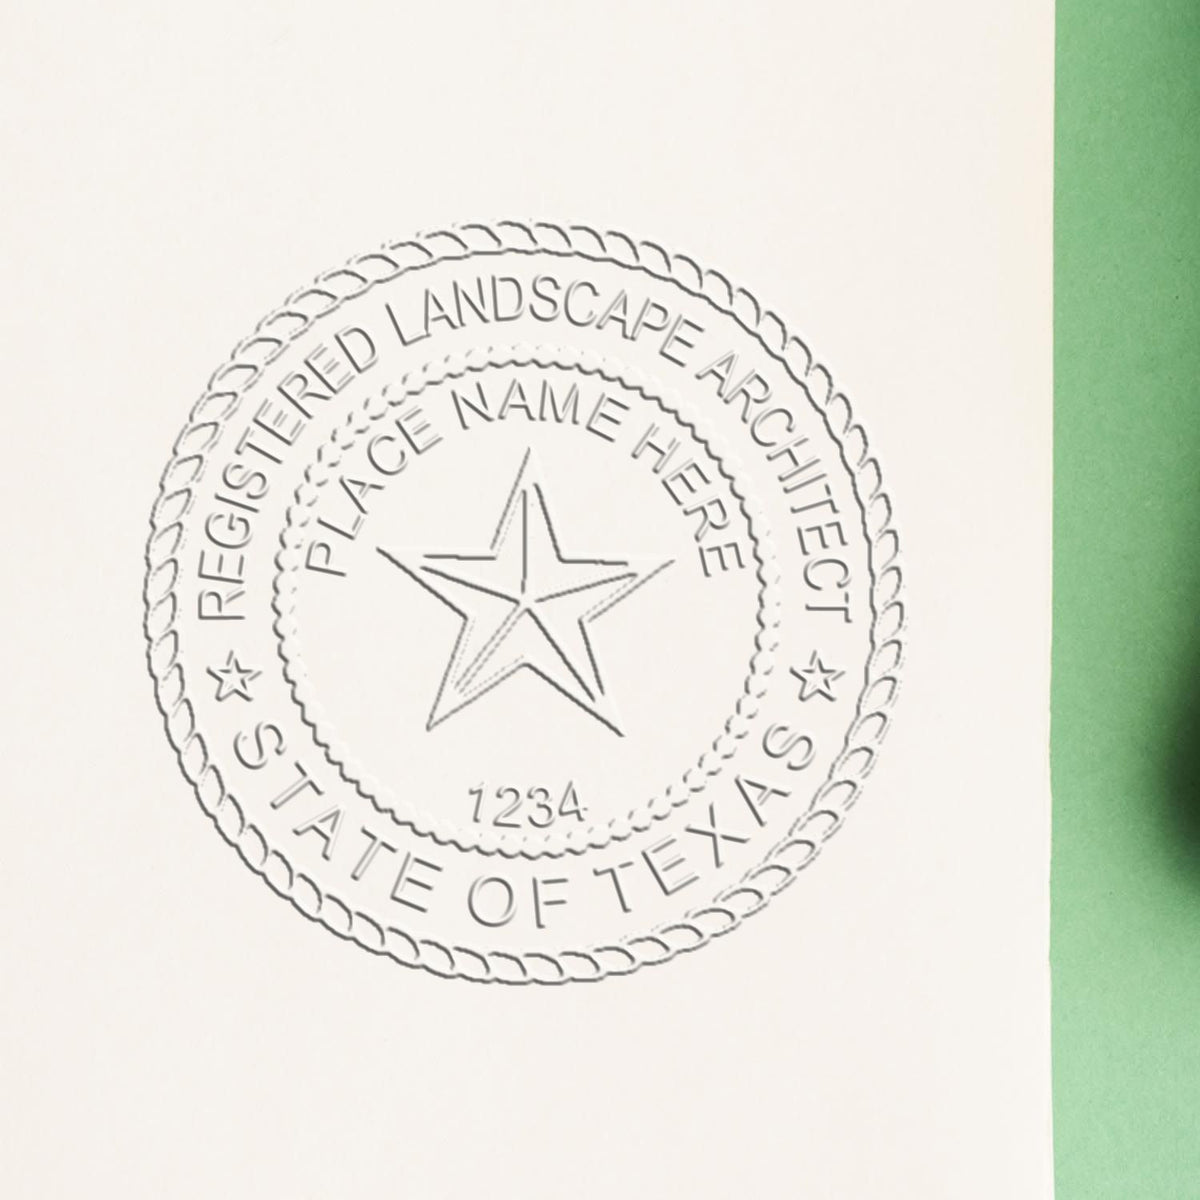 A stamped impression of the Soft Pocket Texas Landscape Architect Embosser in this stylish lifestyle photo, setting the tone for a unique and personalized product.